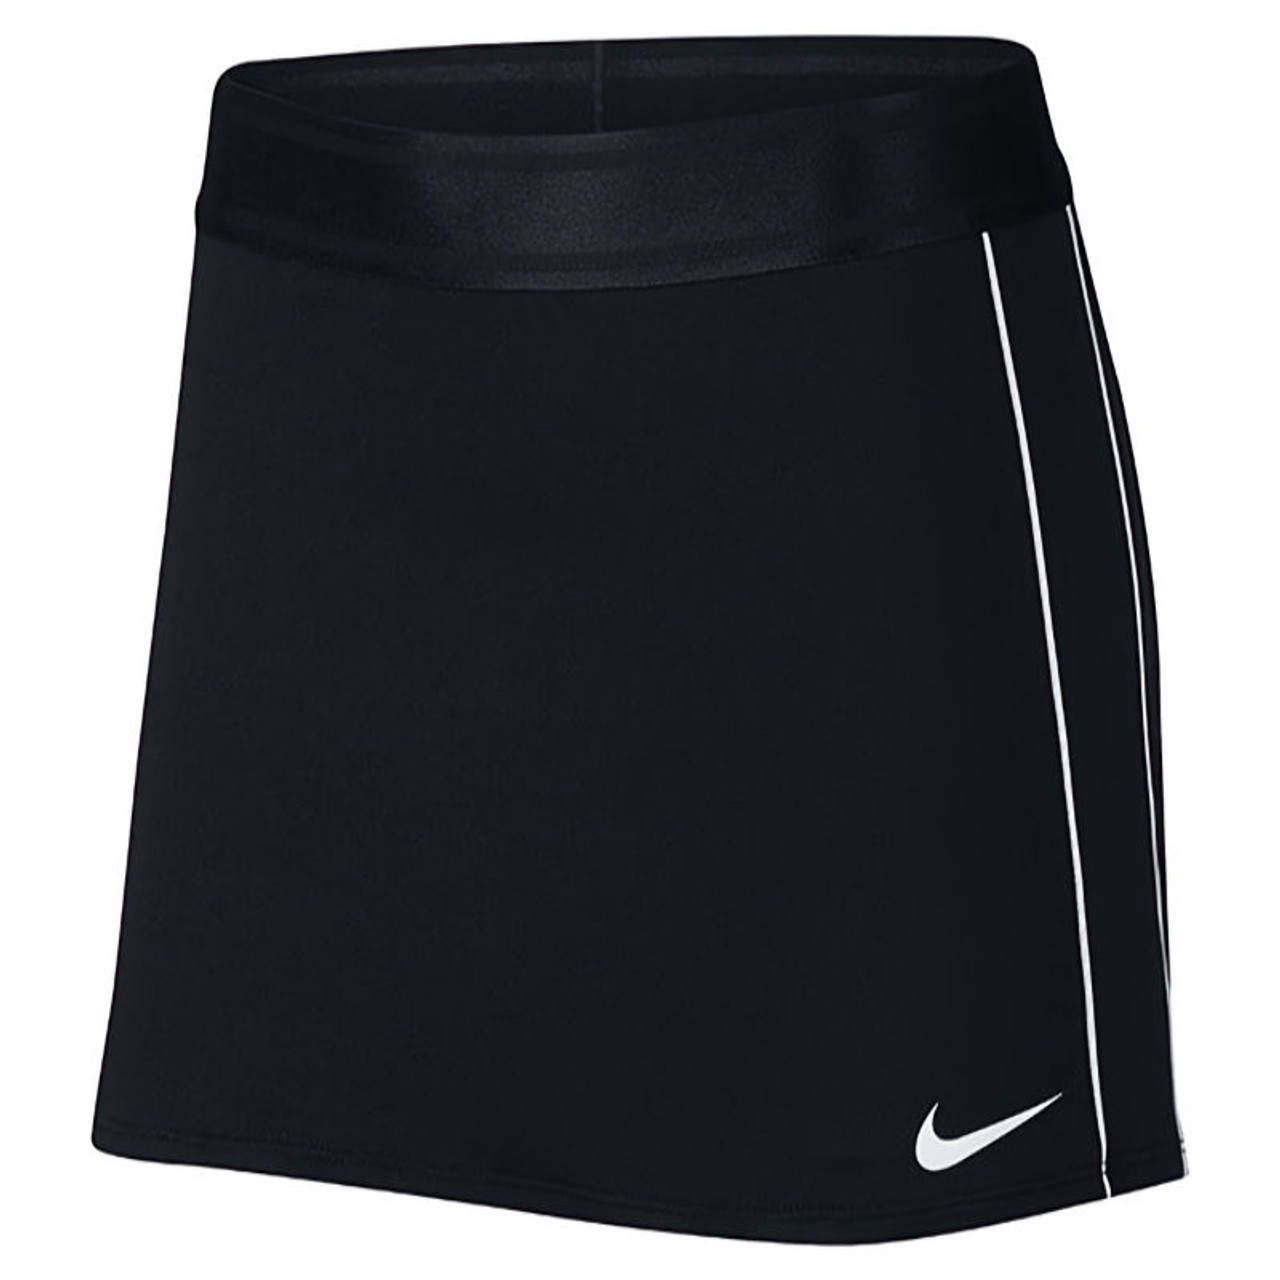 haai tennis overloop Nike Court Dry Straight Skirt available in Tall, Black in stock